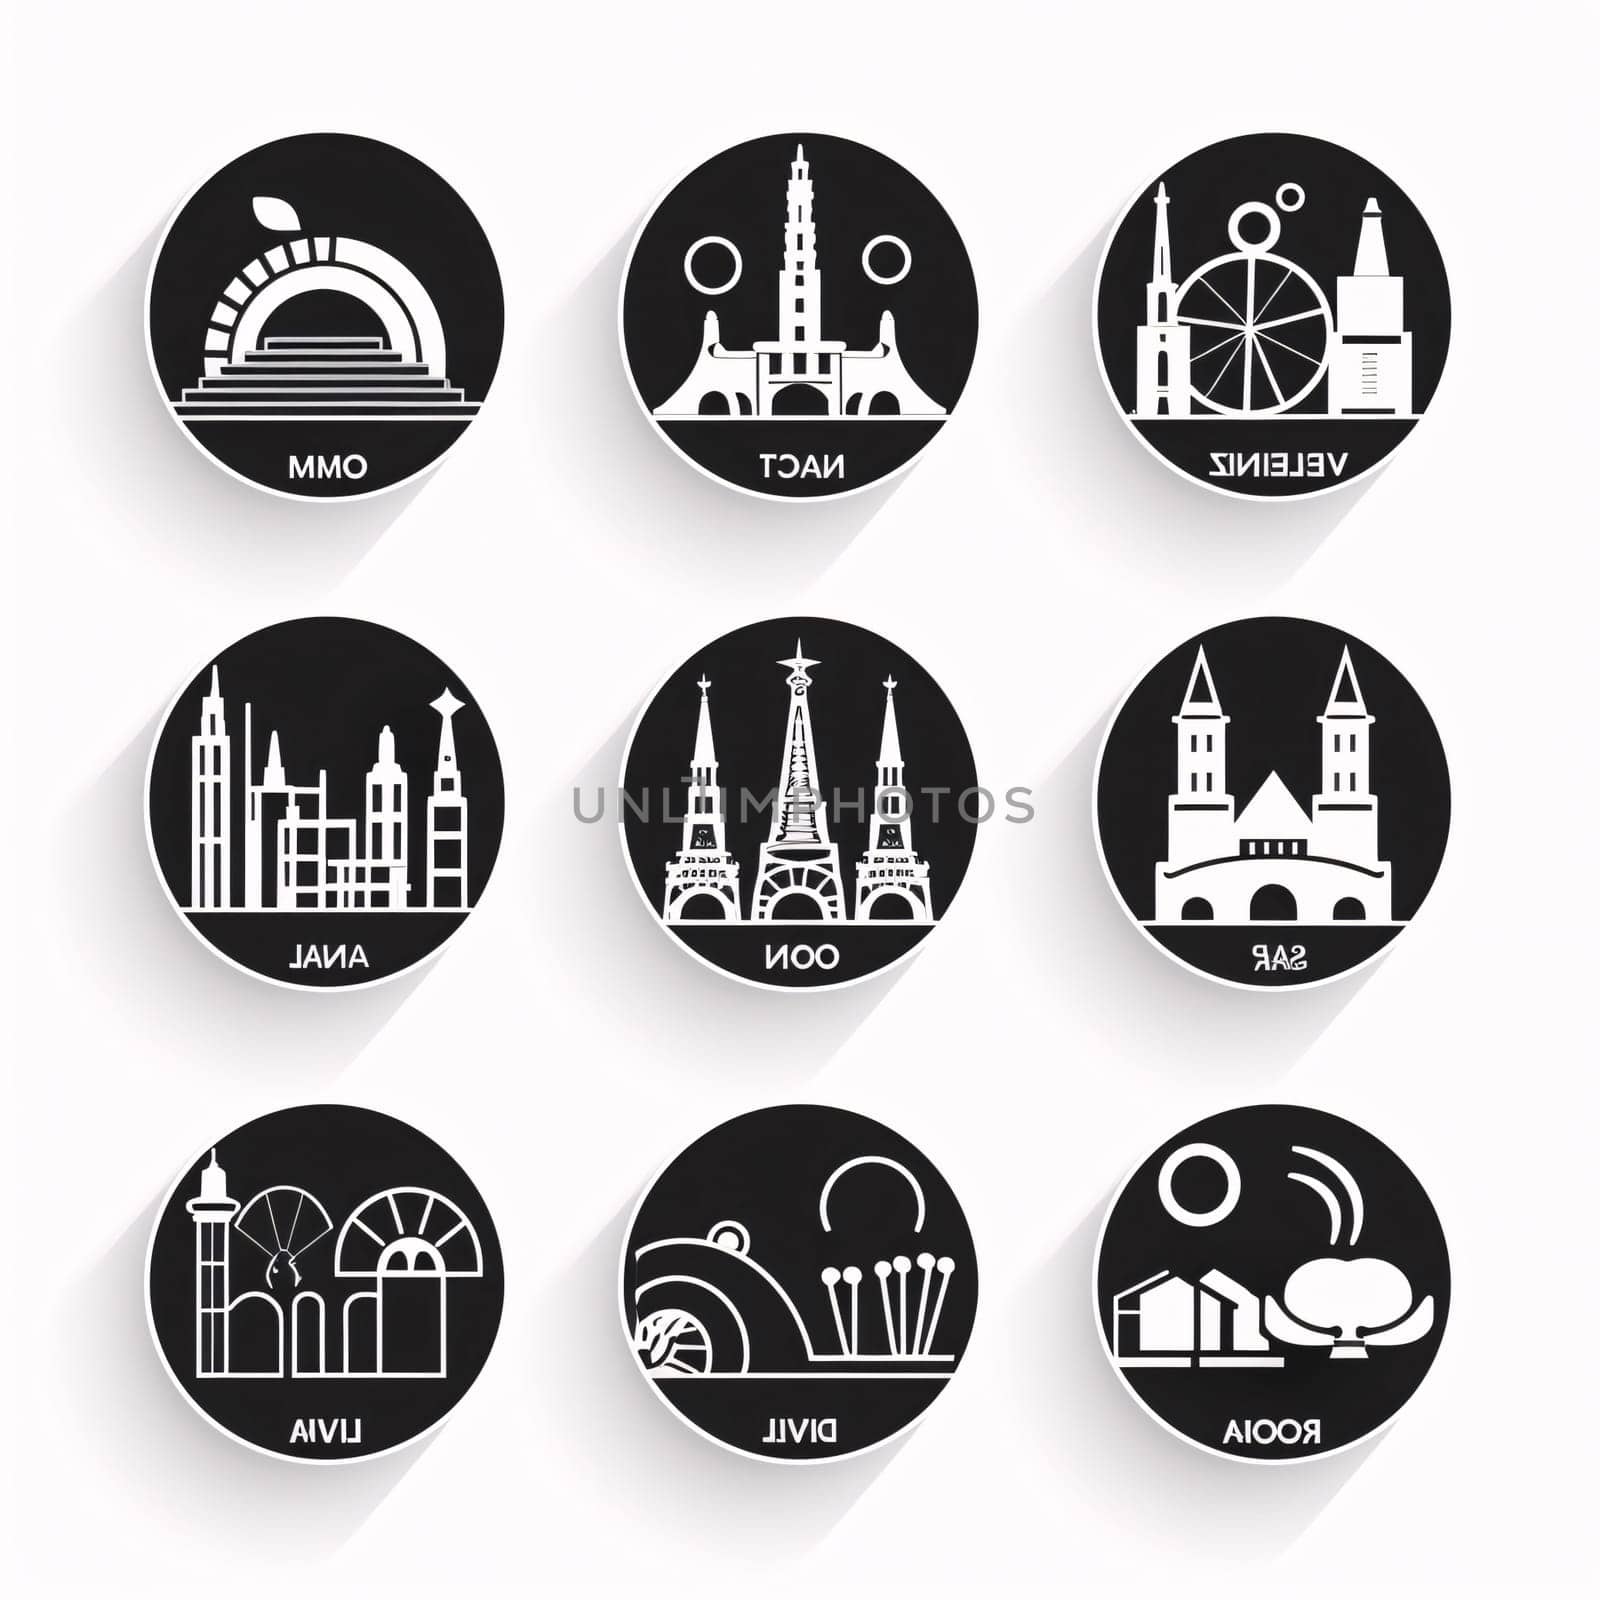 New icons collection: World landmarks icons set with long shadow effect. Vector illustration for your design